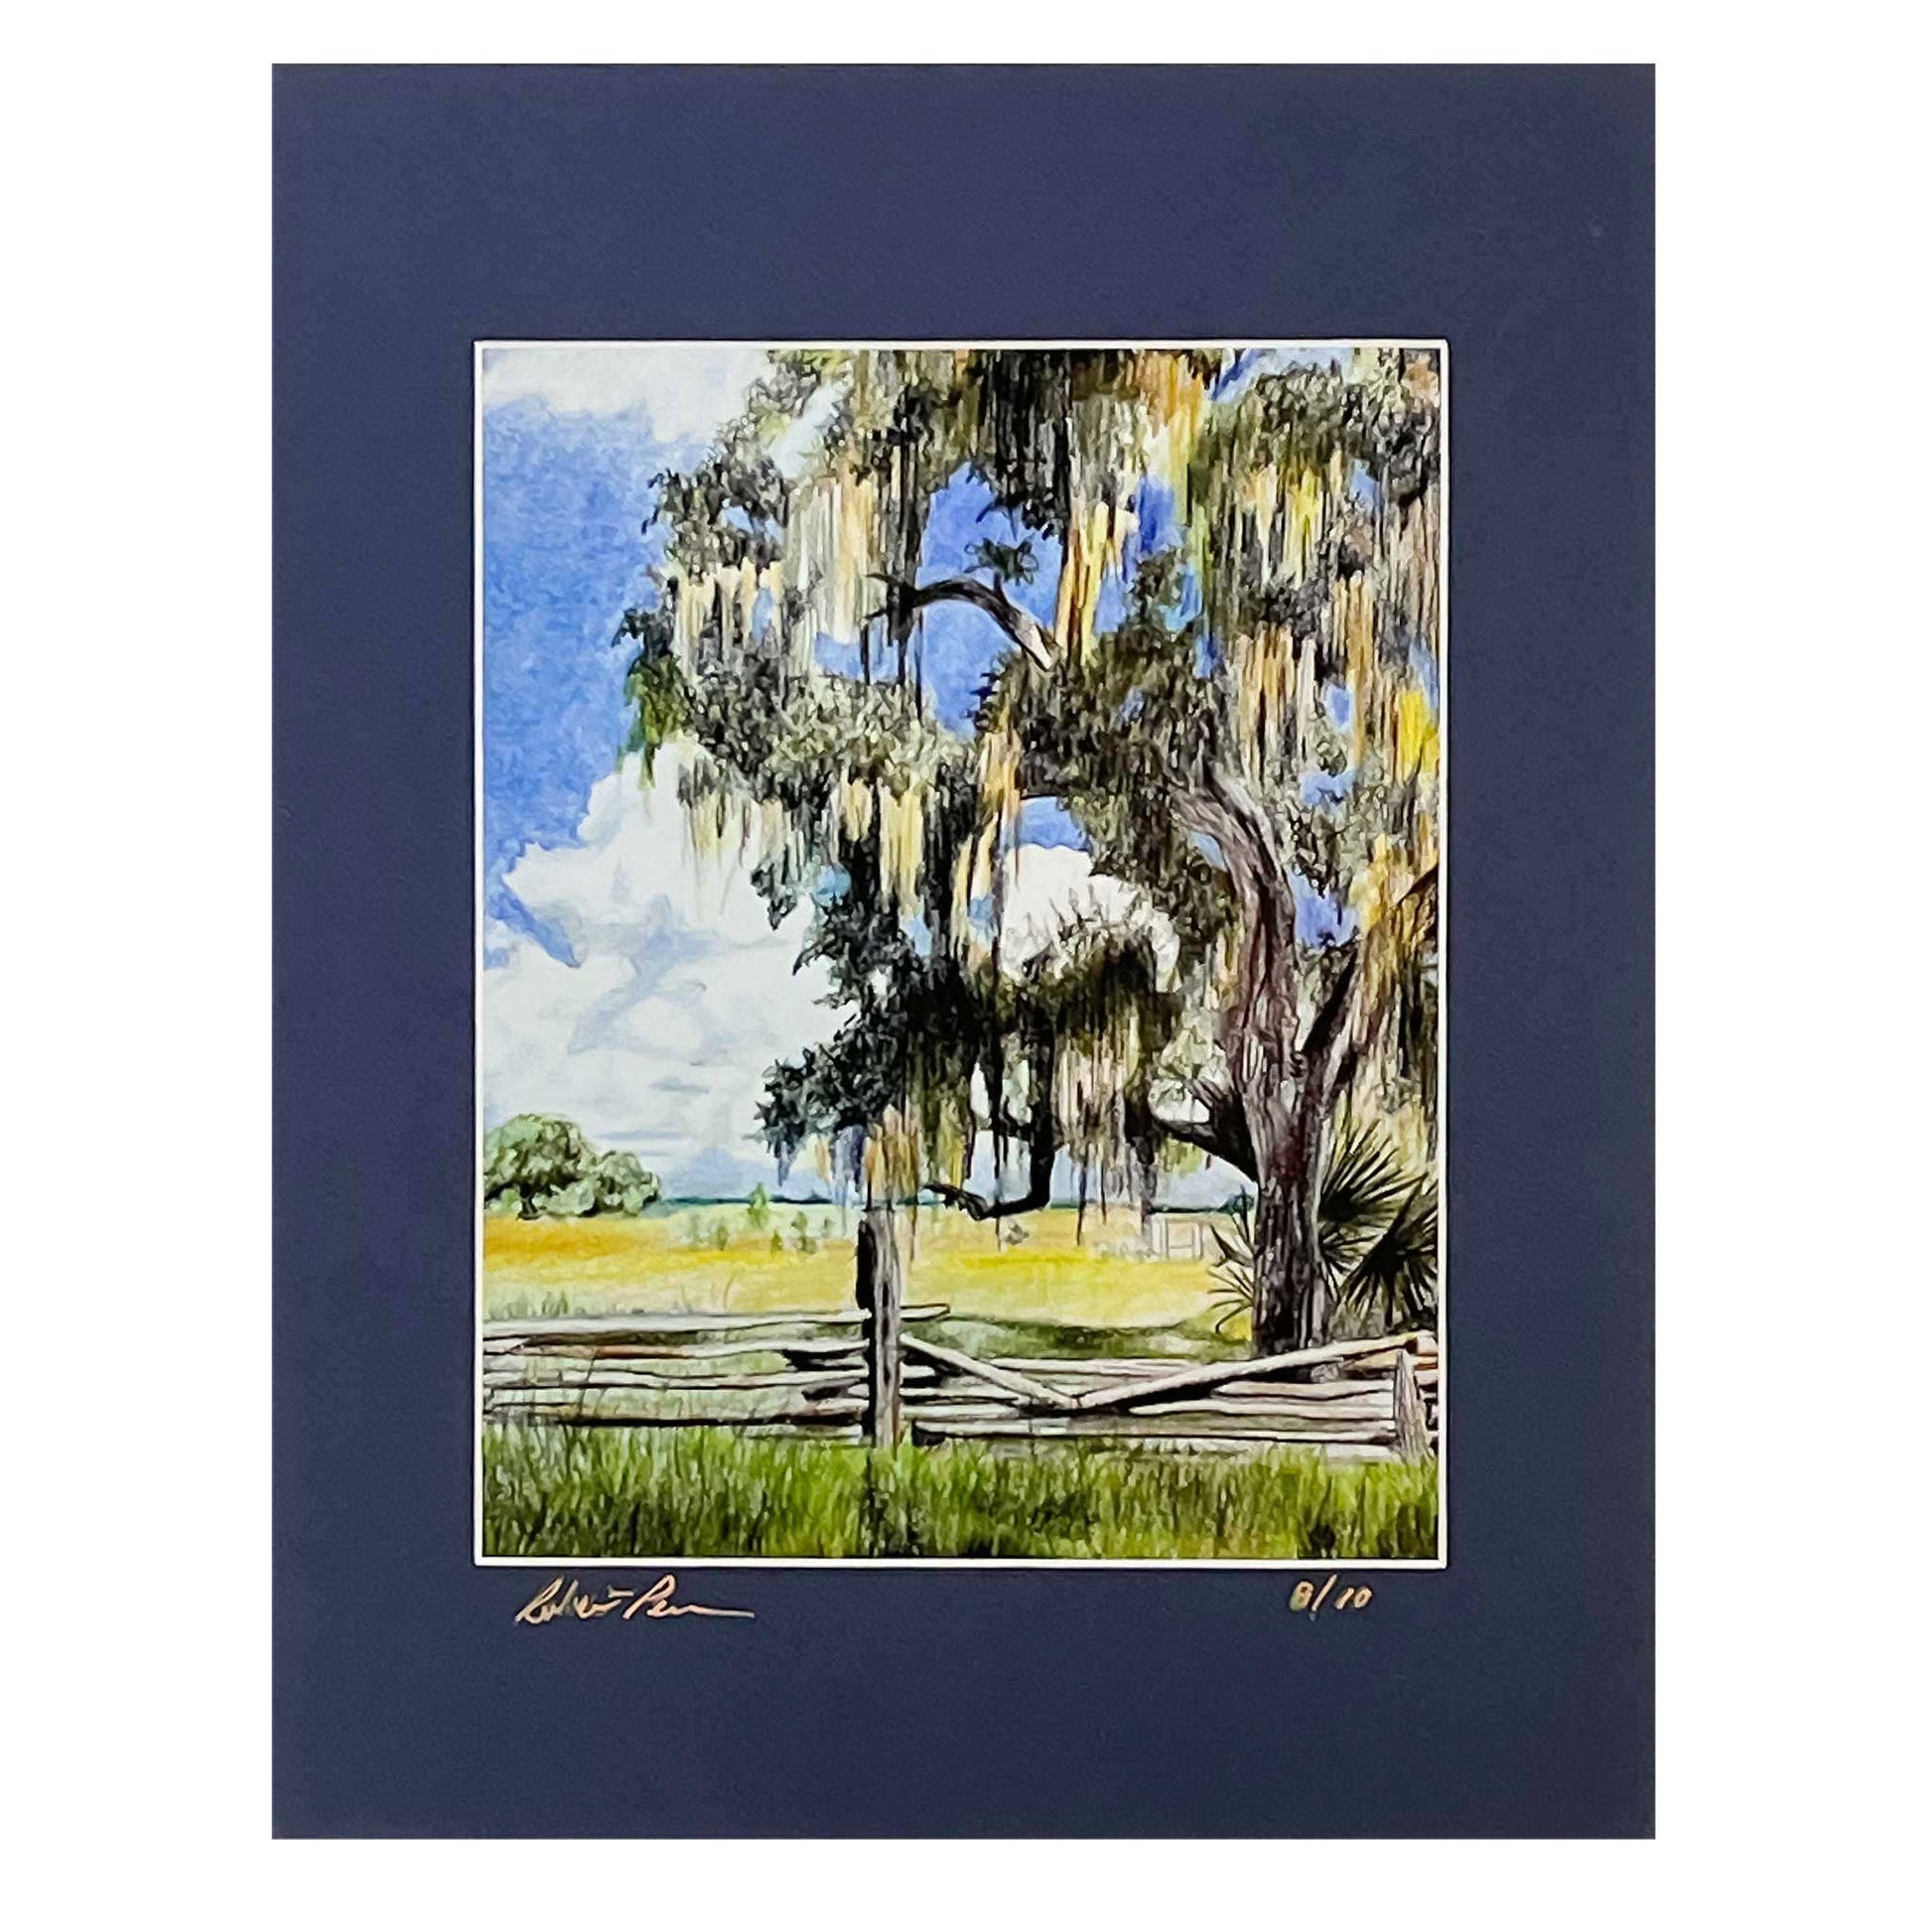 WP Cracker Ranch Print of Colored Pencil Painting by Bob Pearson. Bob is an accomplished colored pencil artist. 11 x 14" matted print. Live oak tree with Spanish Moss. Green Grass and Blue skies. Beautiful Florida Scene. Beautiful ranch near Kissimmee Florida.